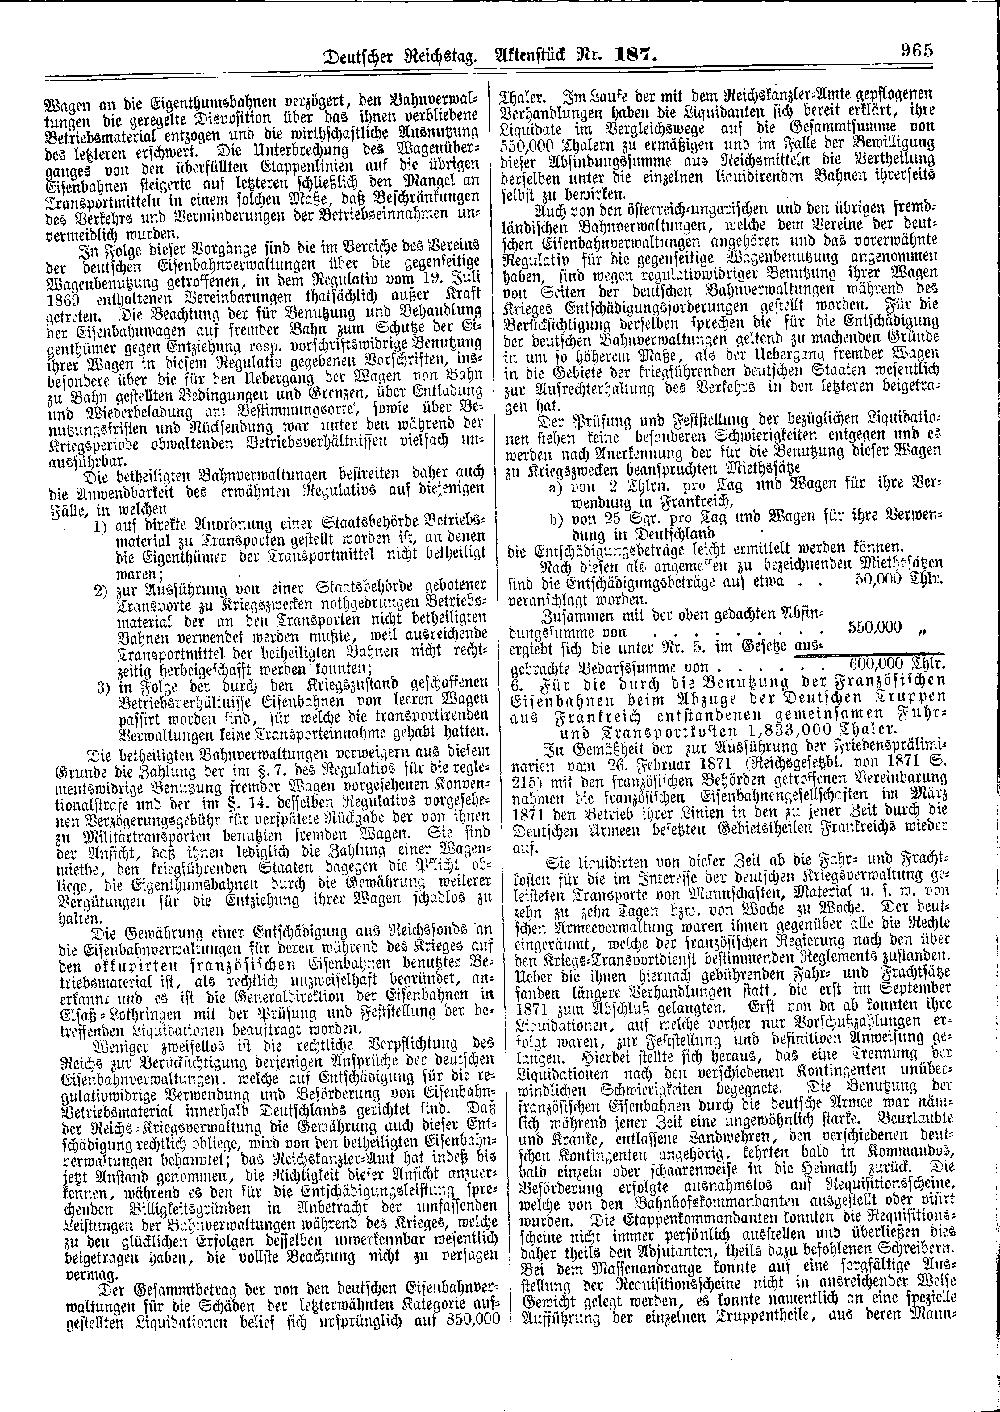 Scan of page 965